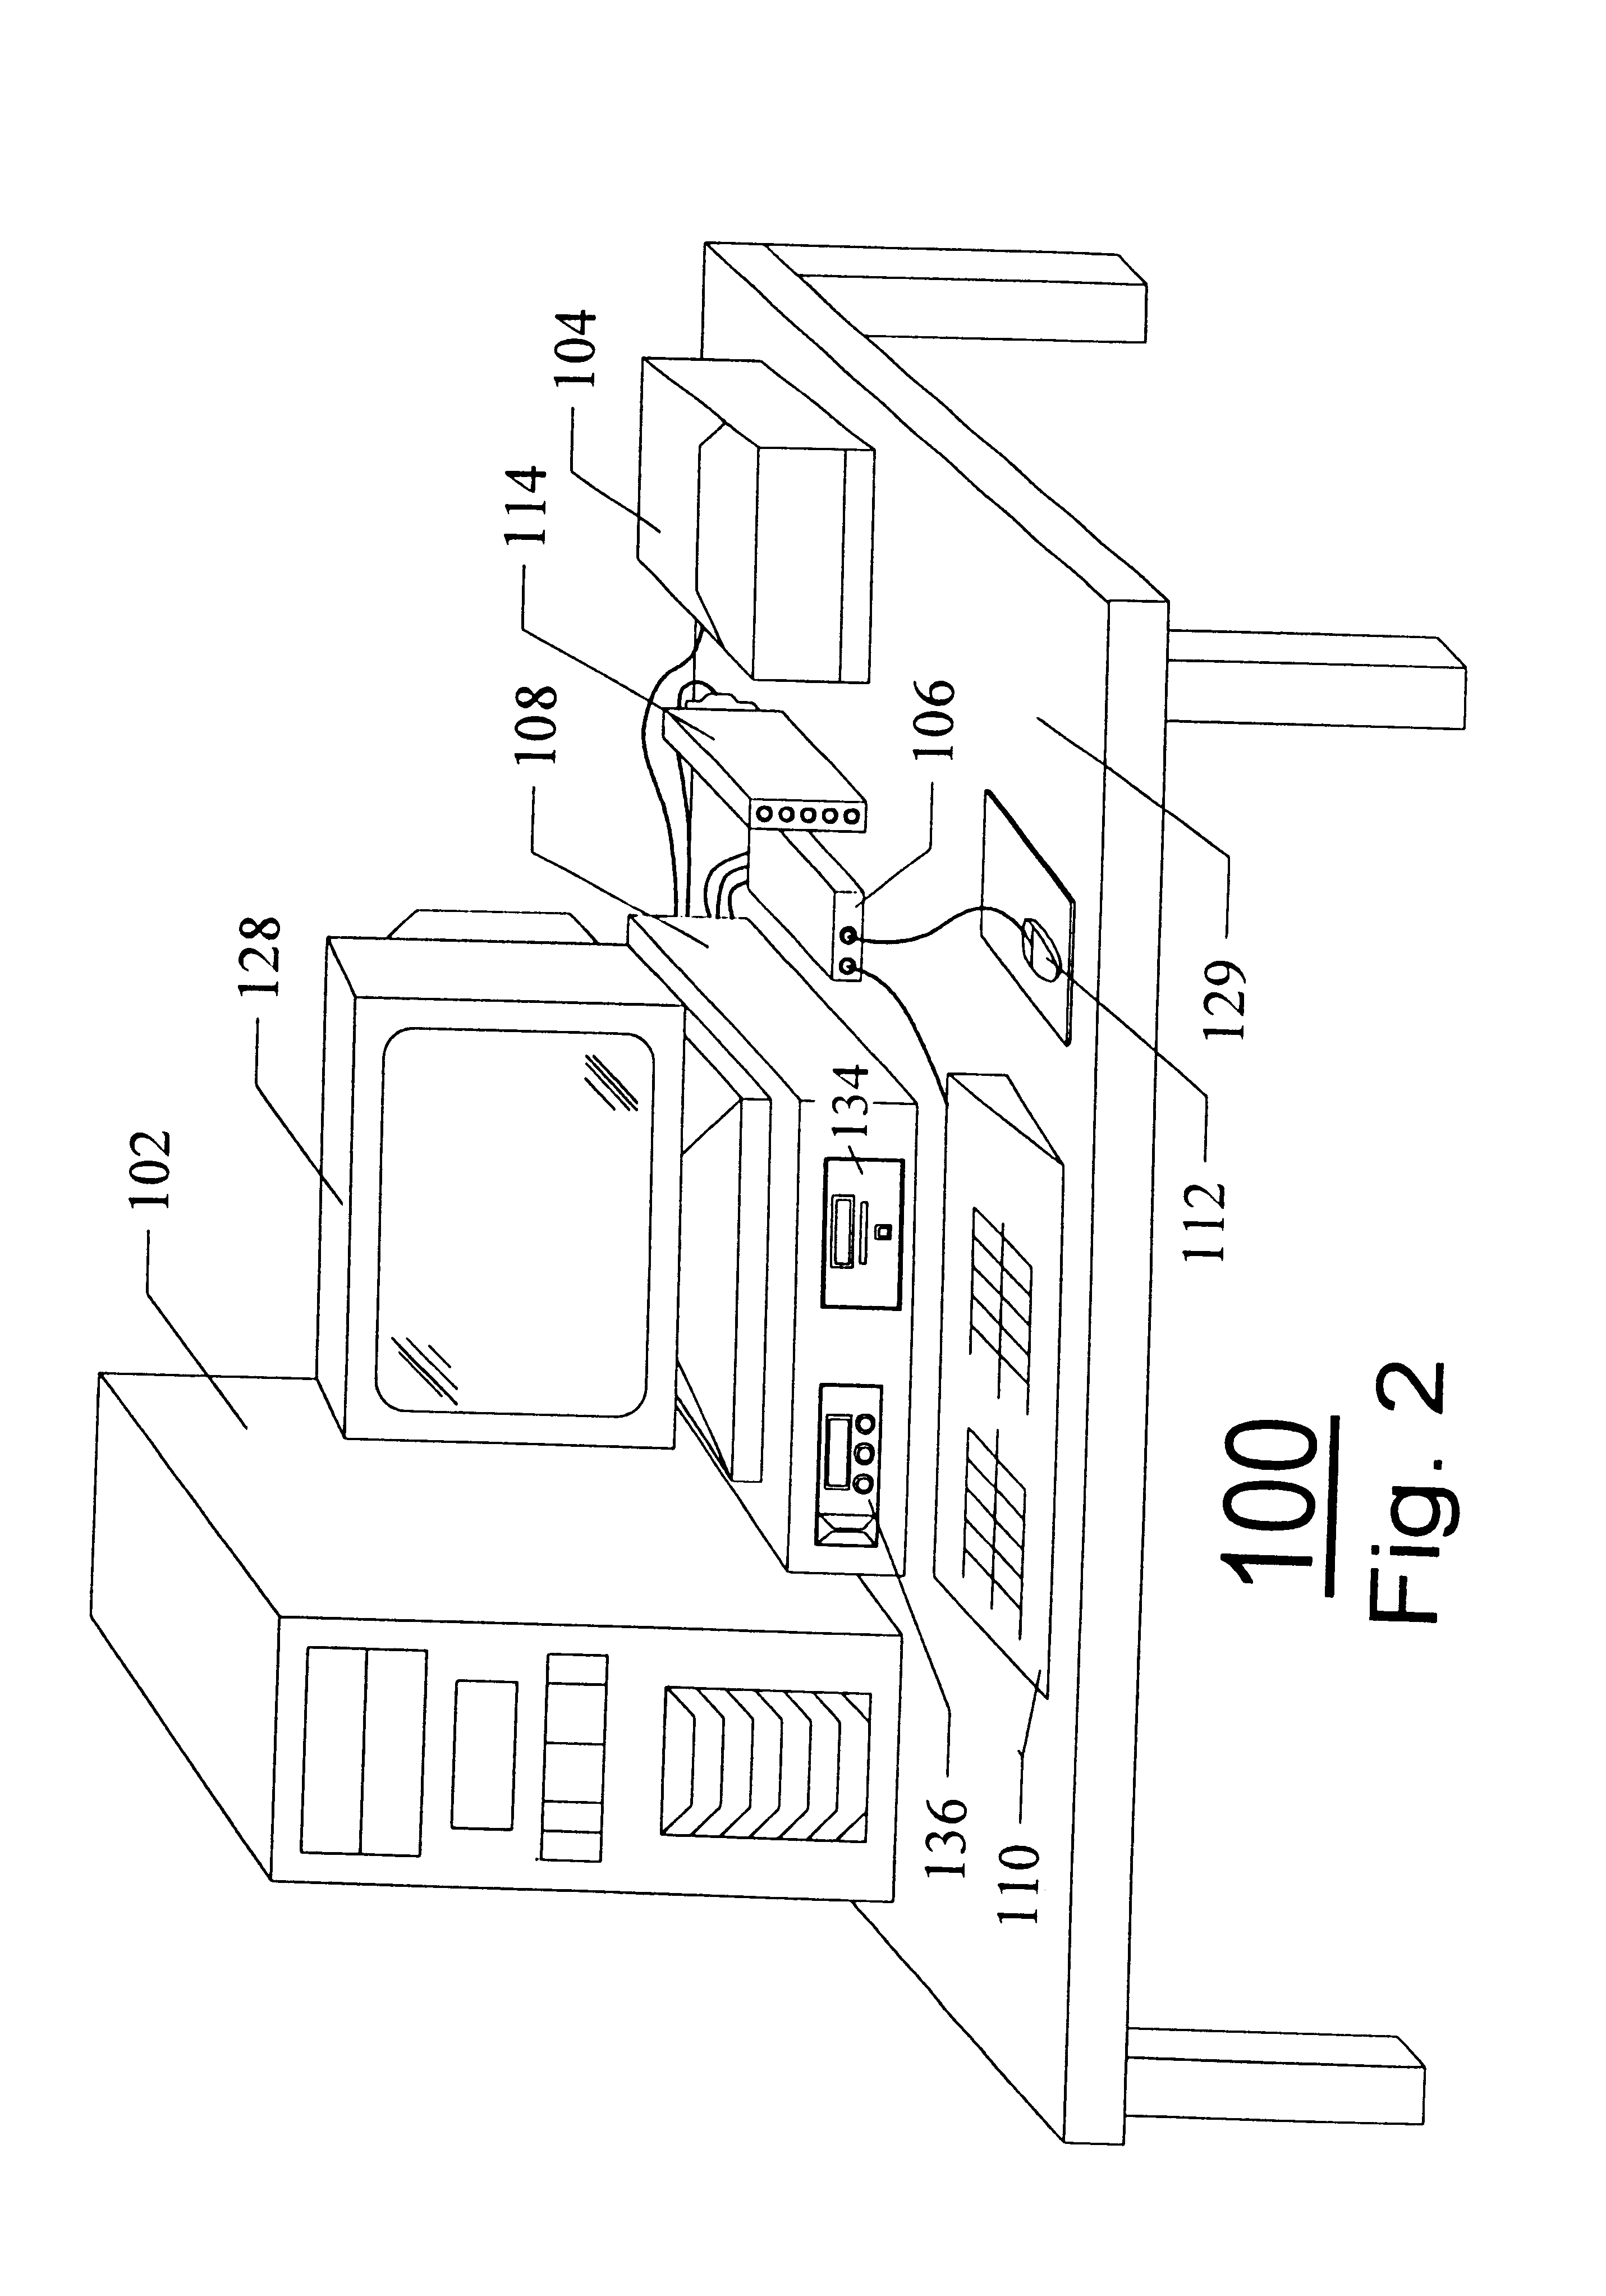 Method of transacting an electronic mail, an electronic commerce, and an electronic business transaction by an electronic commerce terminal using a wirelessly networked plurality of portable digital devices